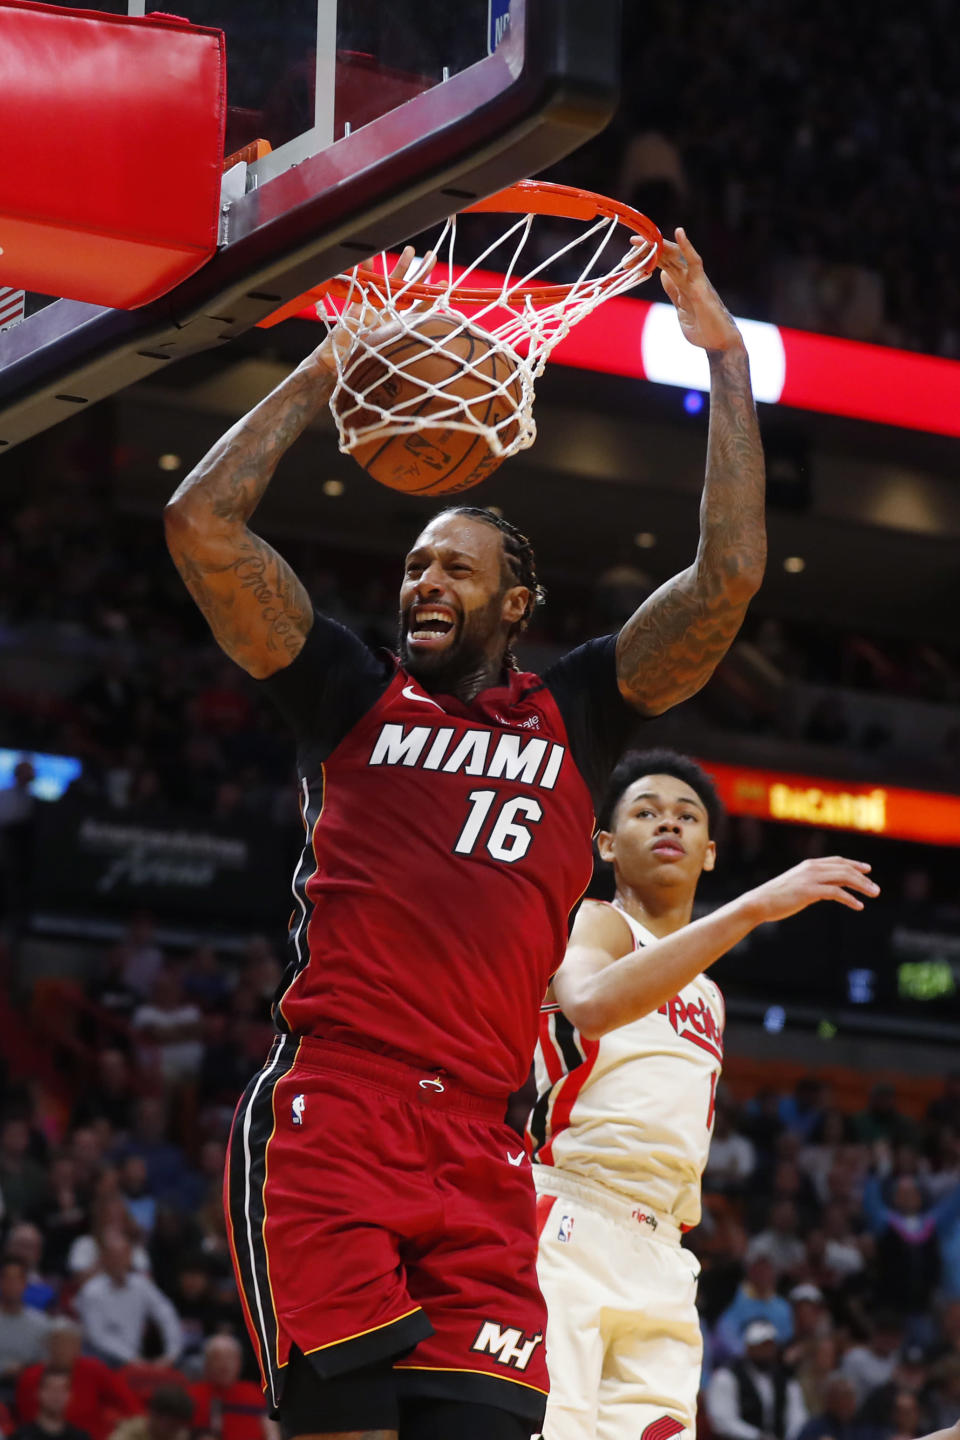 Miami Heat forward James Johnson (16) dunks against Portland Trail Blazers guard Anfernee Simons (1) during the second half of an NBA basketball game, Sunday, Jan. 5, 2020, in Miami. The Heat defeated the Trail Blazers 122-111. (AP Photo/Wilfredo Lee)